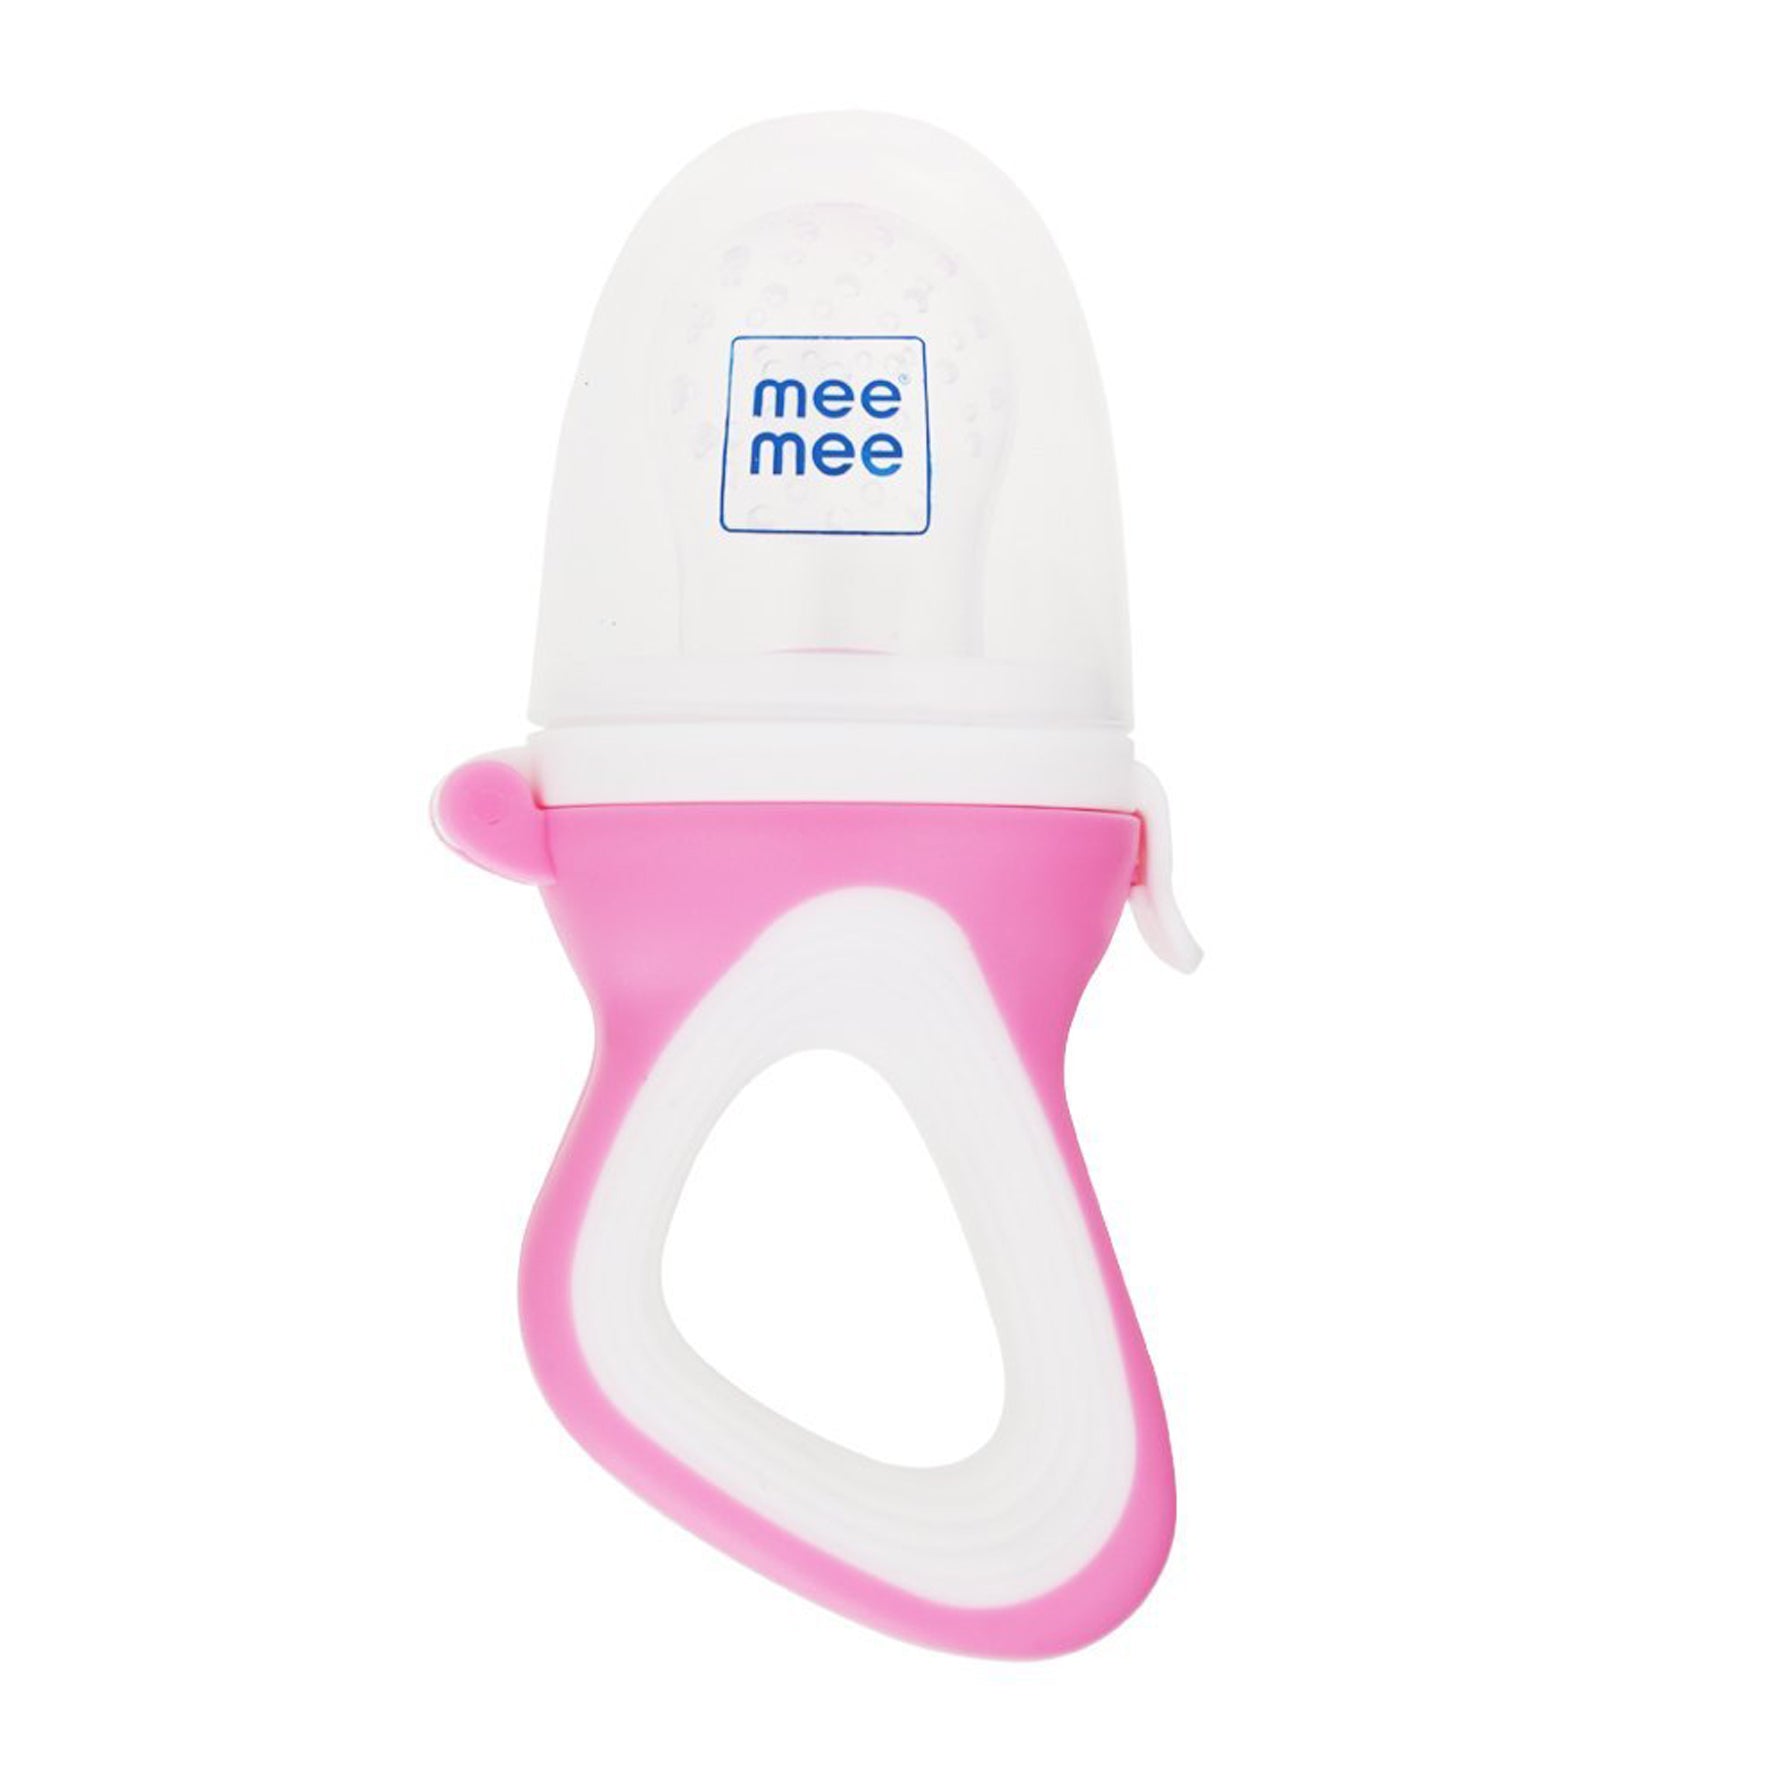 Mee Mee Baby Advanced Fruit & Food Nutritional Baby Feeder for 6 to 12 Months for Babies/Infants | BPA Free | Baby Grip Feeder